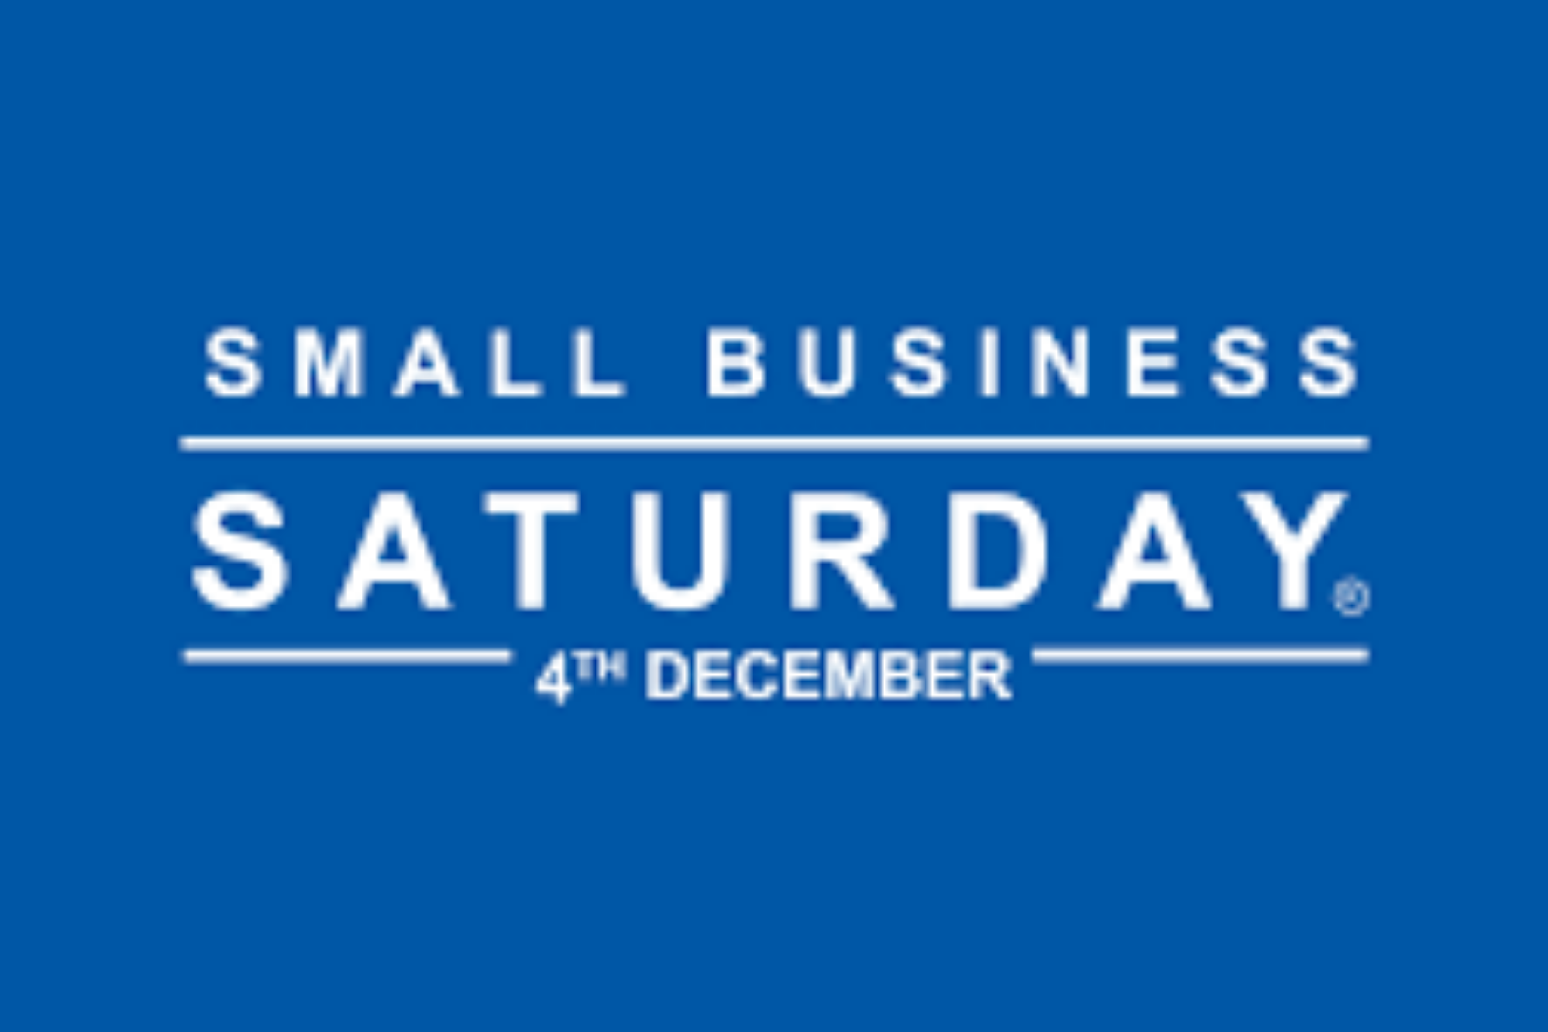 Call to back ‘vital’ small businesses during crucial festive trading period 